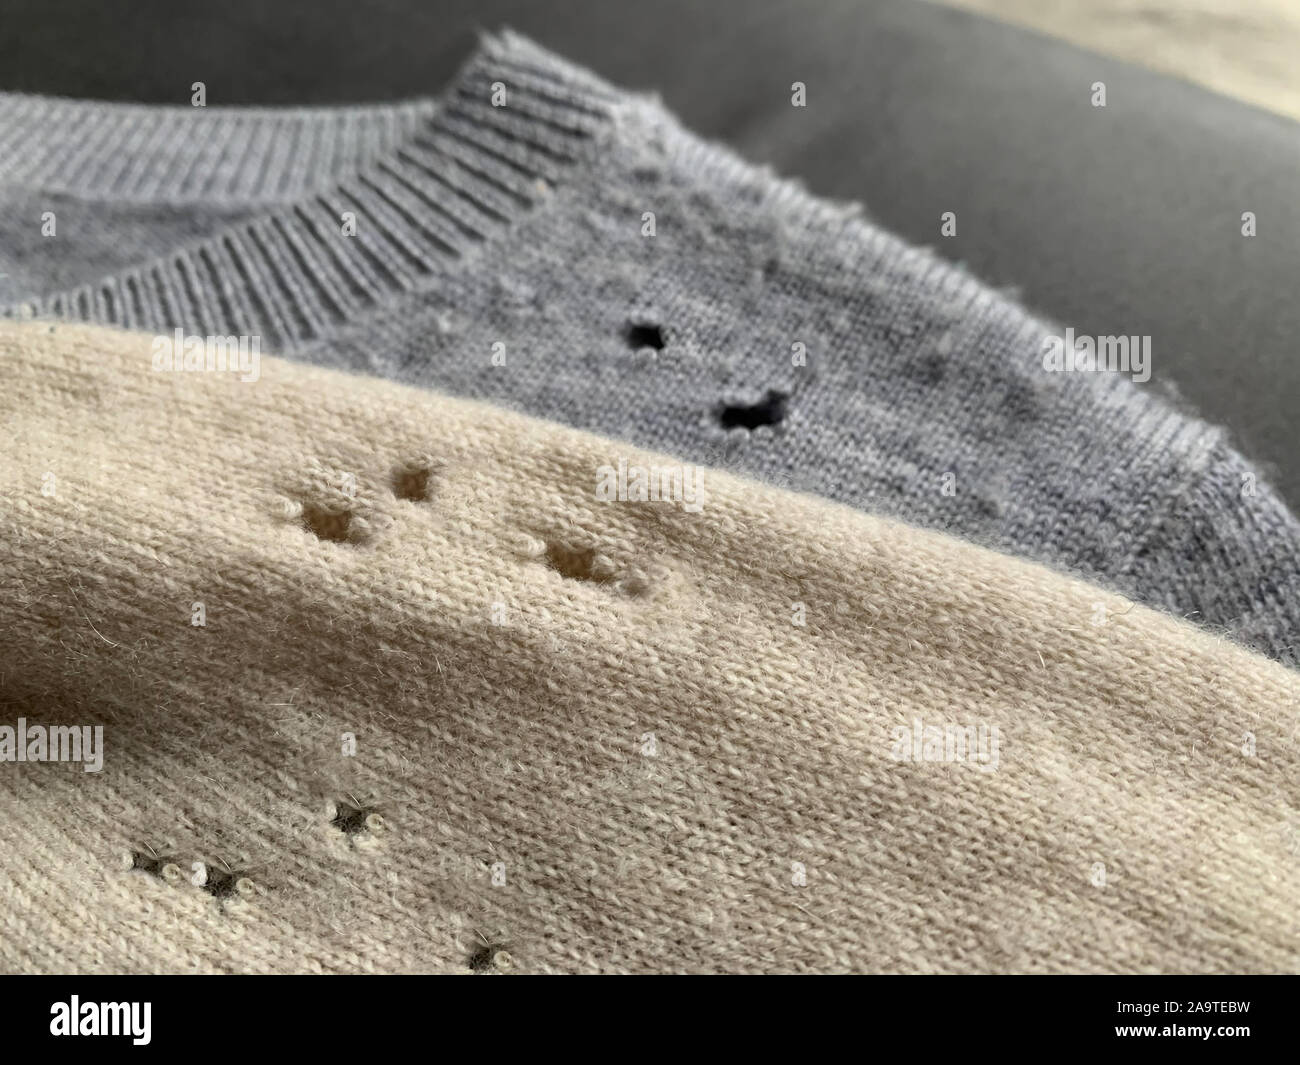 Two expensive cashmere sweaters with holes and damaged, caused by cloth moths (Tineola bisselliella). Selective focus Stock Photo